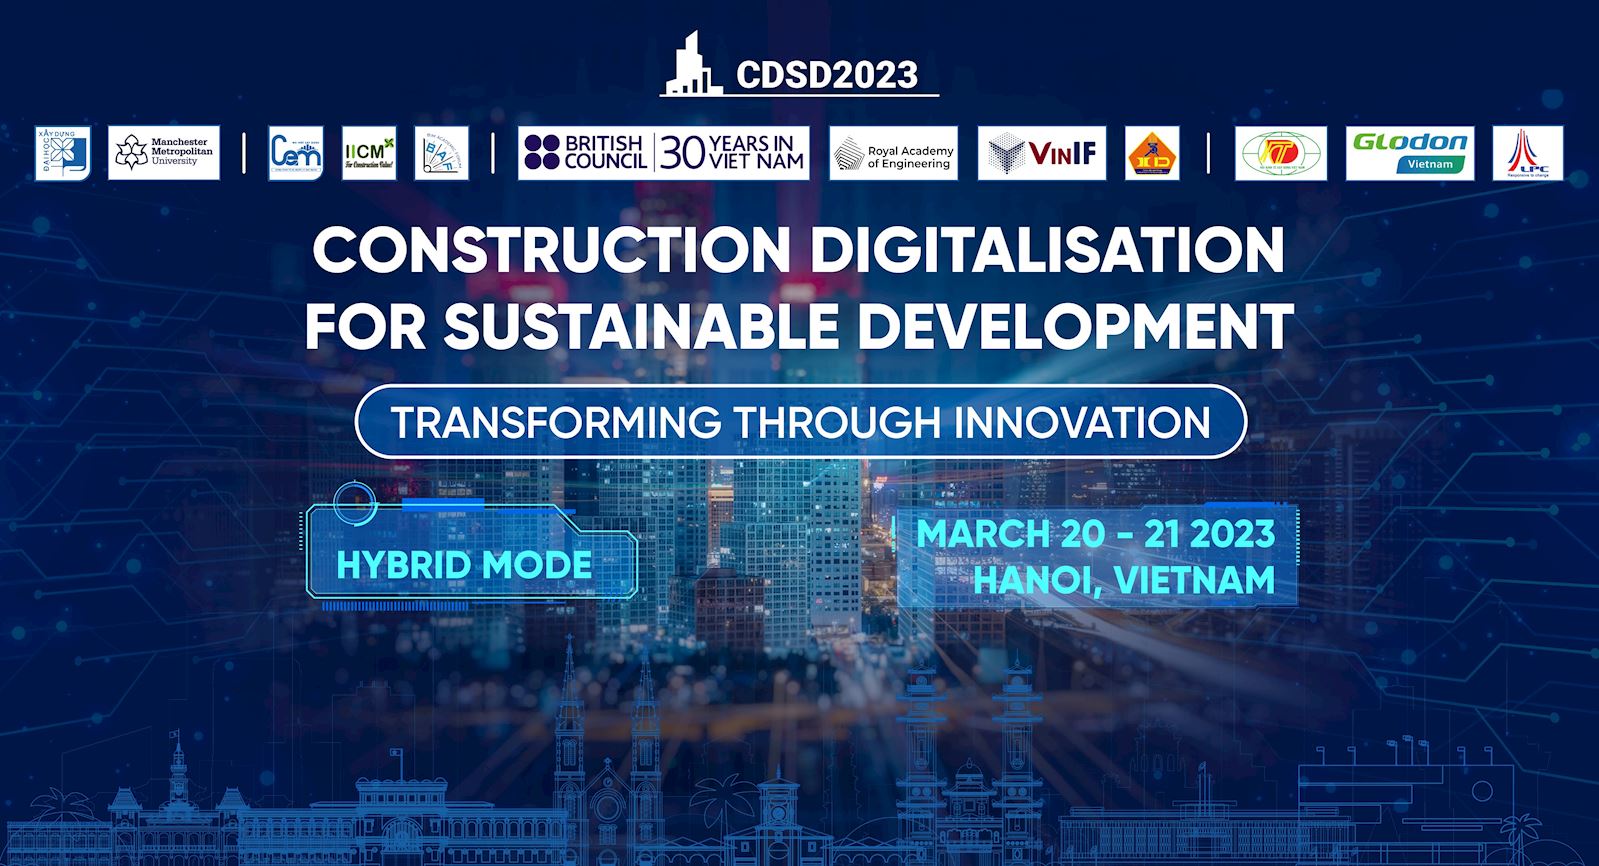 CDSD INTERNATIONAL CONFERENCE 2023: DIGITAL TRANSFORMATION OF THE CONSTRUCTION INDUSTRY FOR SUSTAINABLE DEVELOPMENT - TRANSFORMATION THROUGH INNOVATION